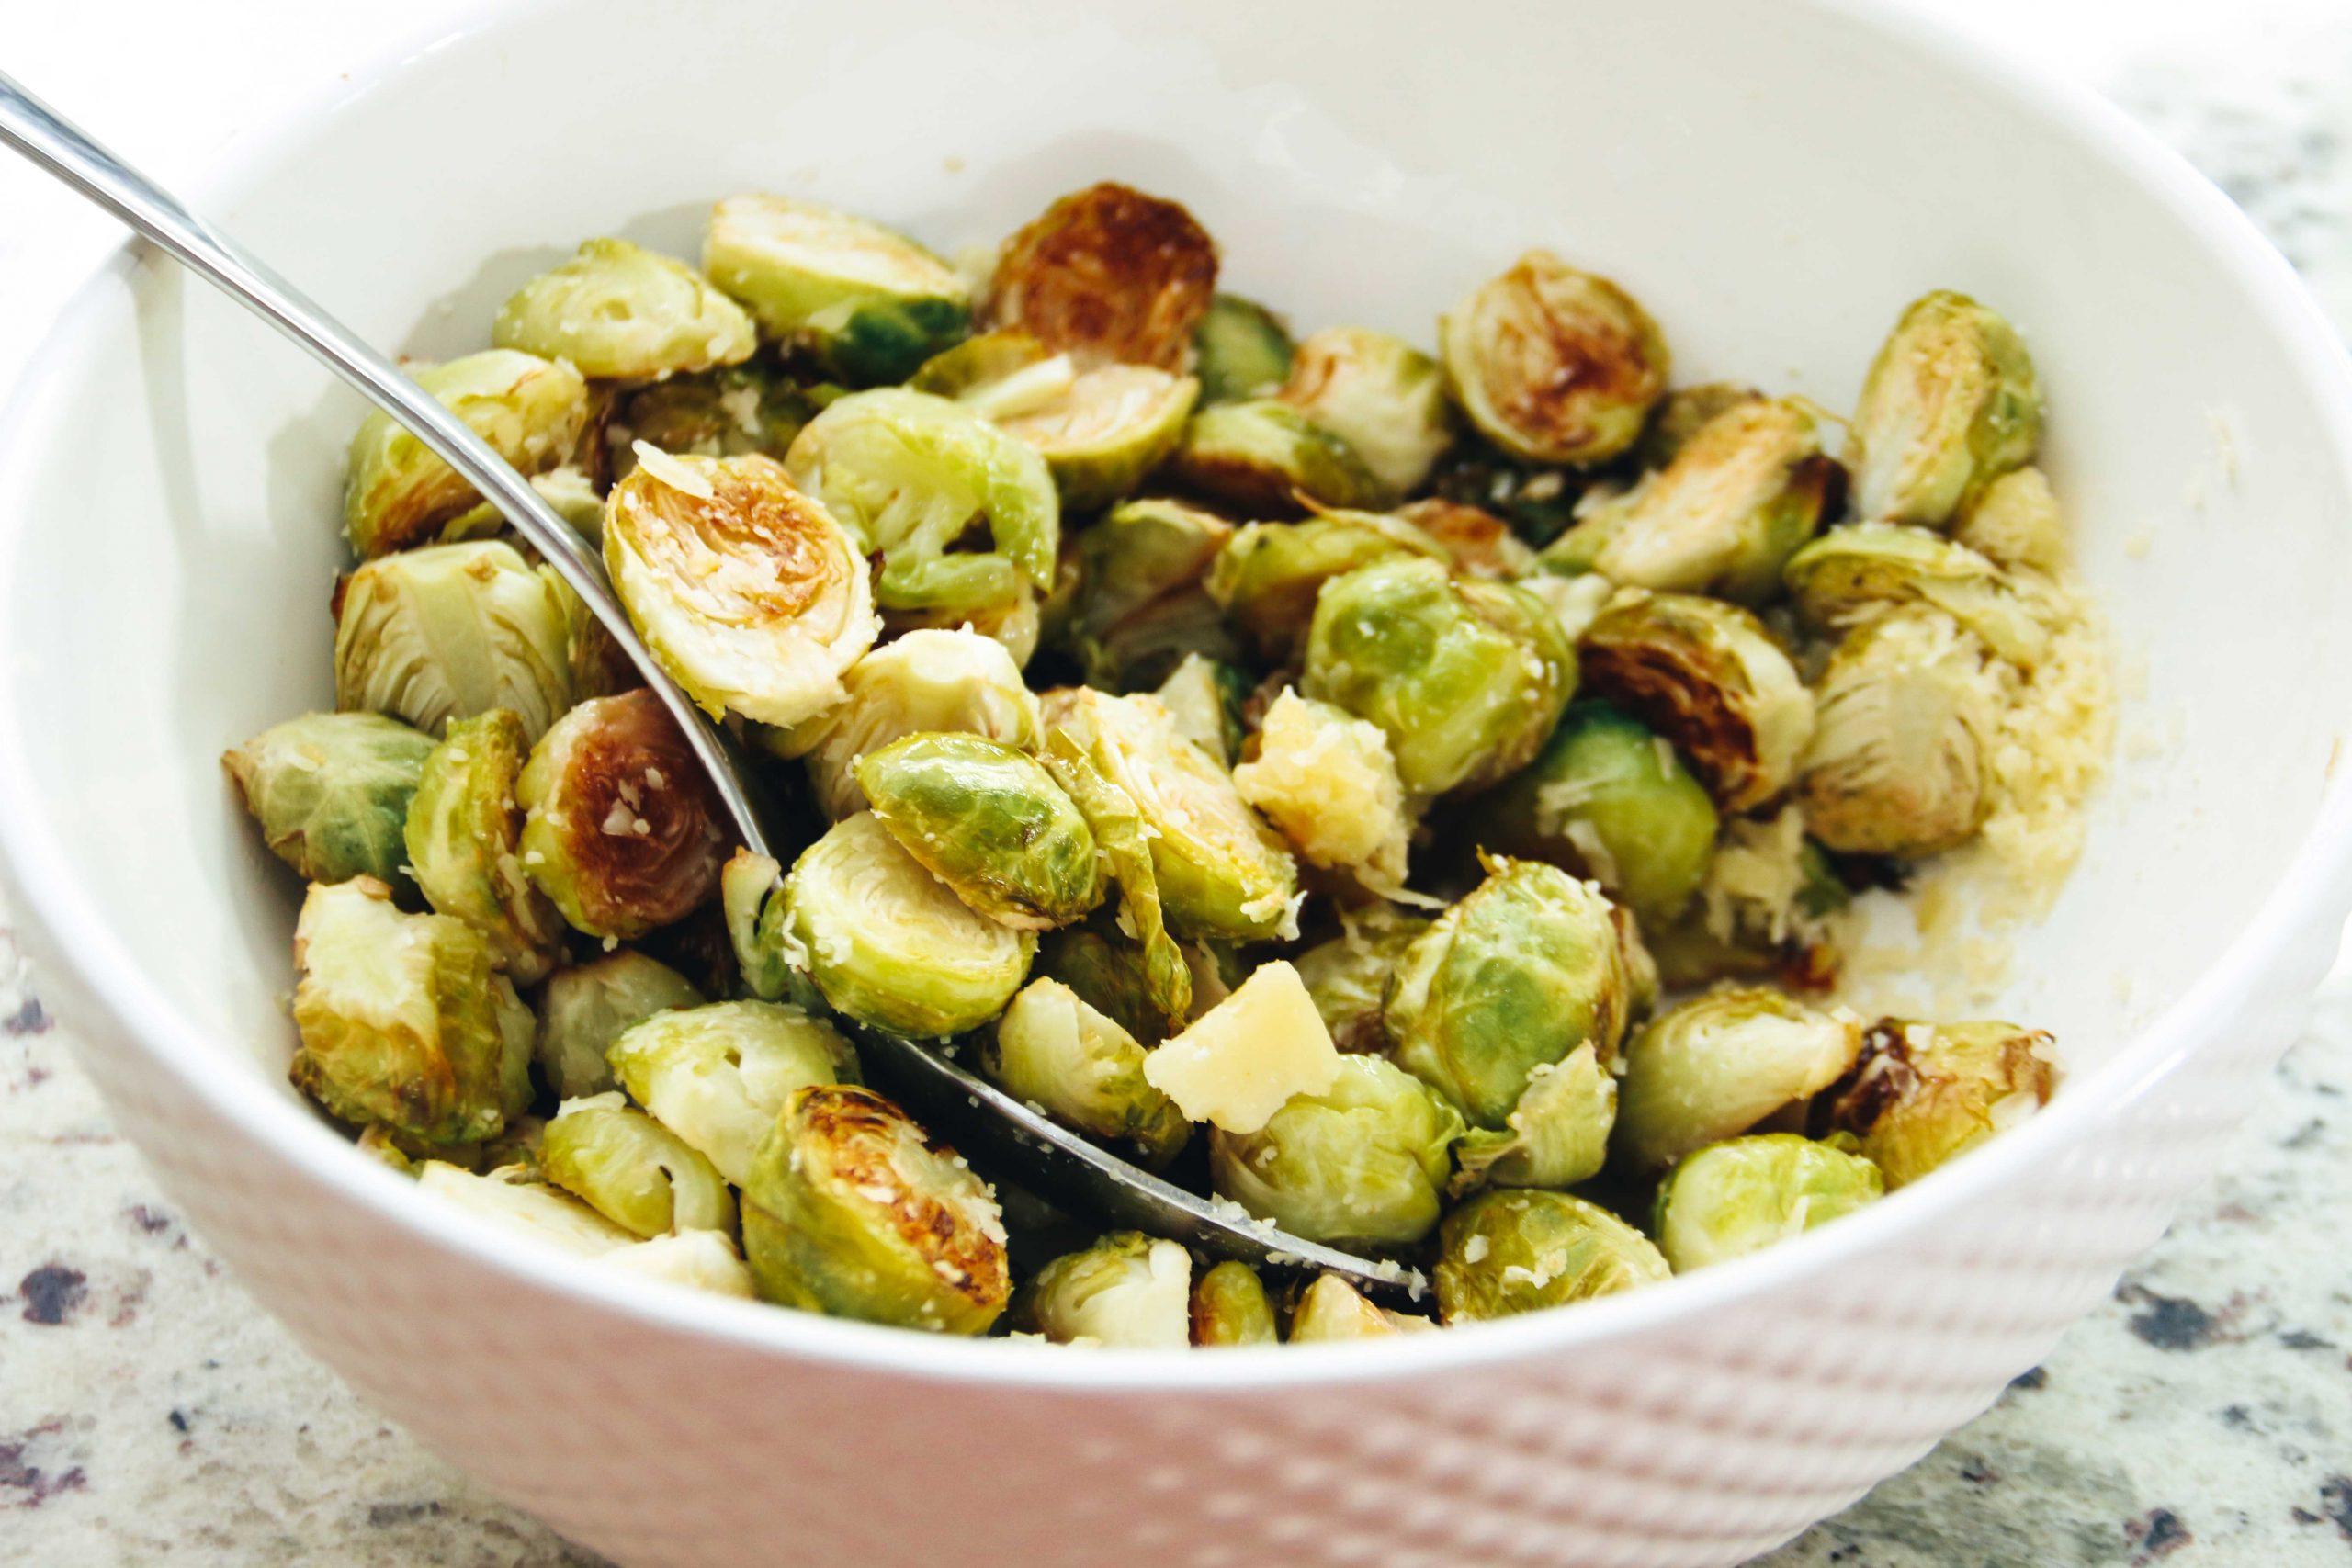 Roasted Brussels Sprouts with Parmesan, Garlic and Lemon